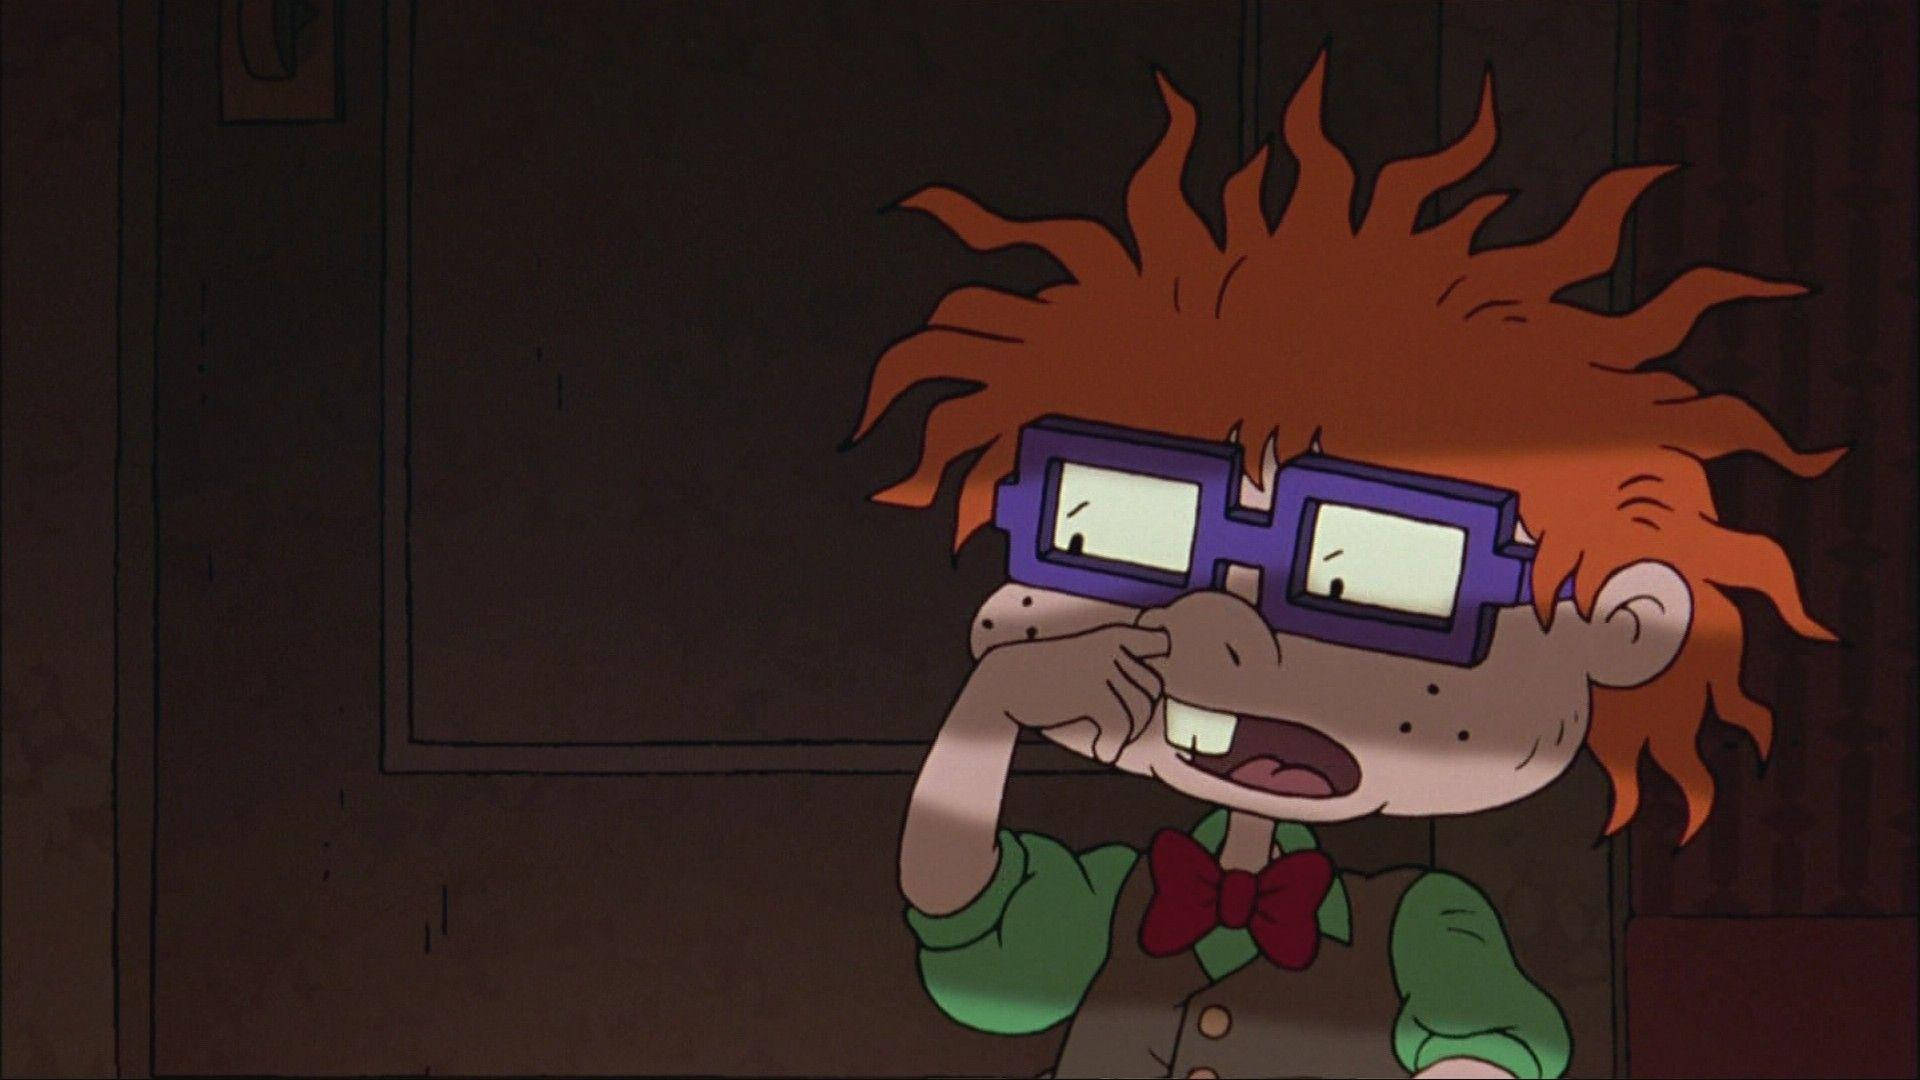 Join the Rugrats gang for some awesome adventures! Wallpaper